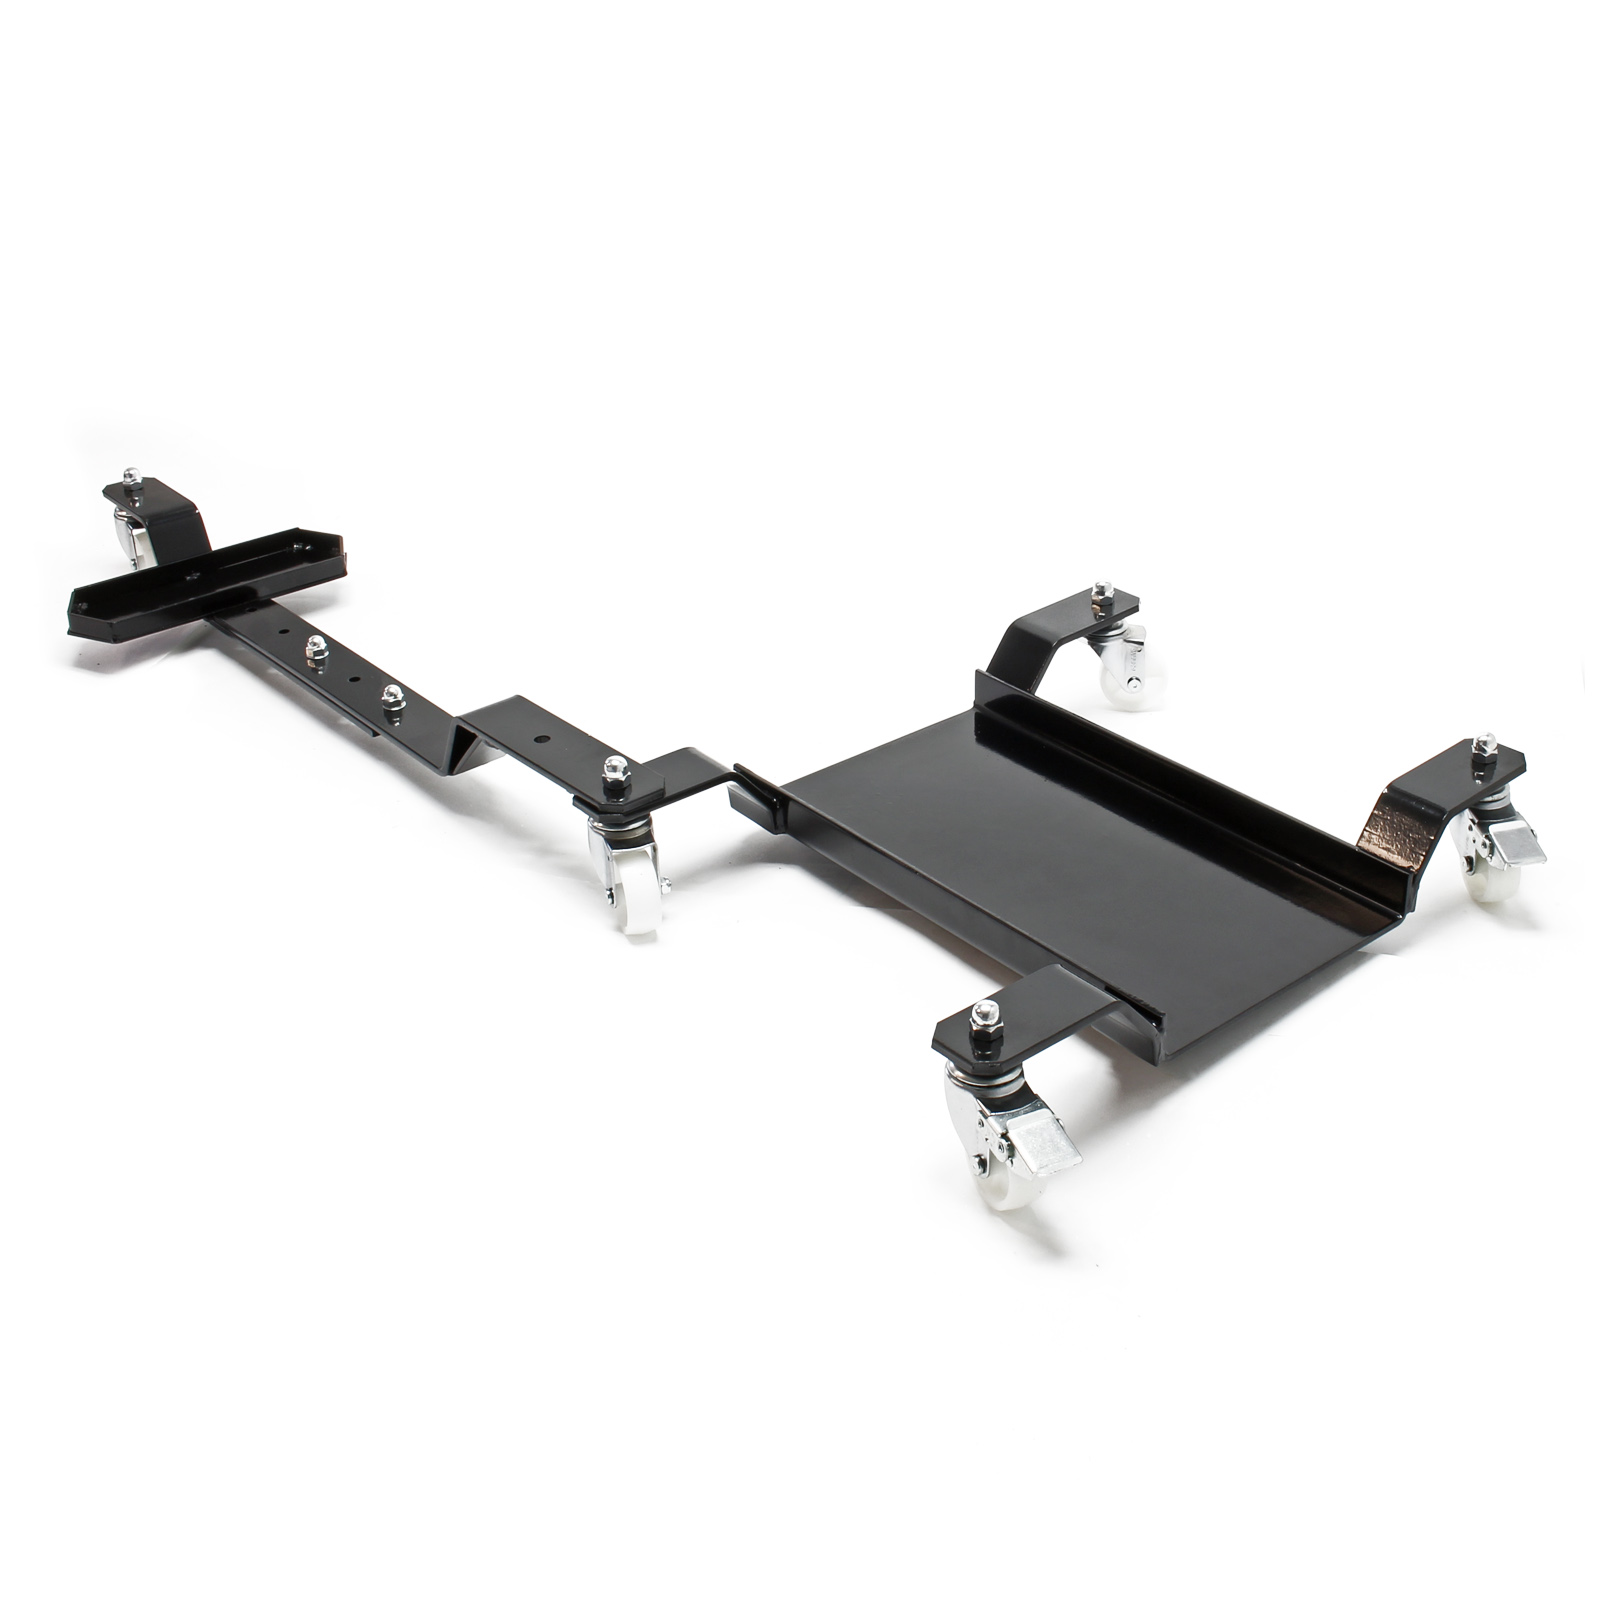 Wiltec Heavy Duty Motorcycle Dolly Motorbike Side Stand Hauler Hitch Parking Aid up to 560 kg 